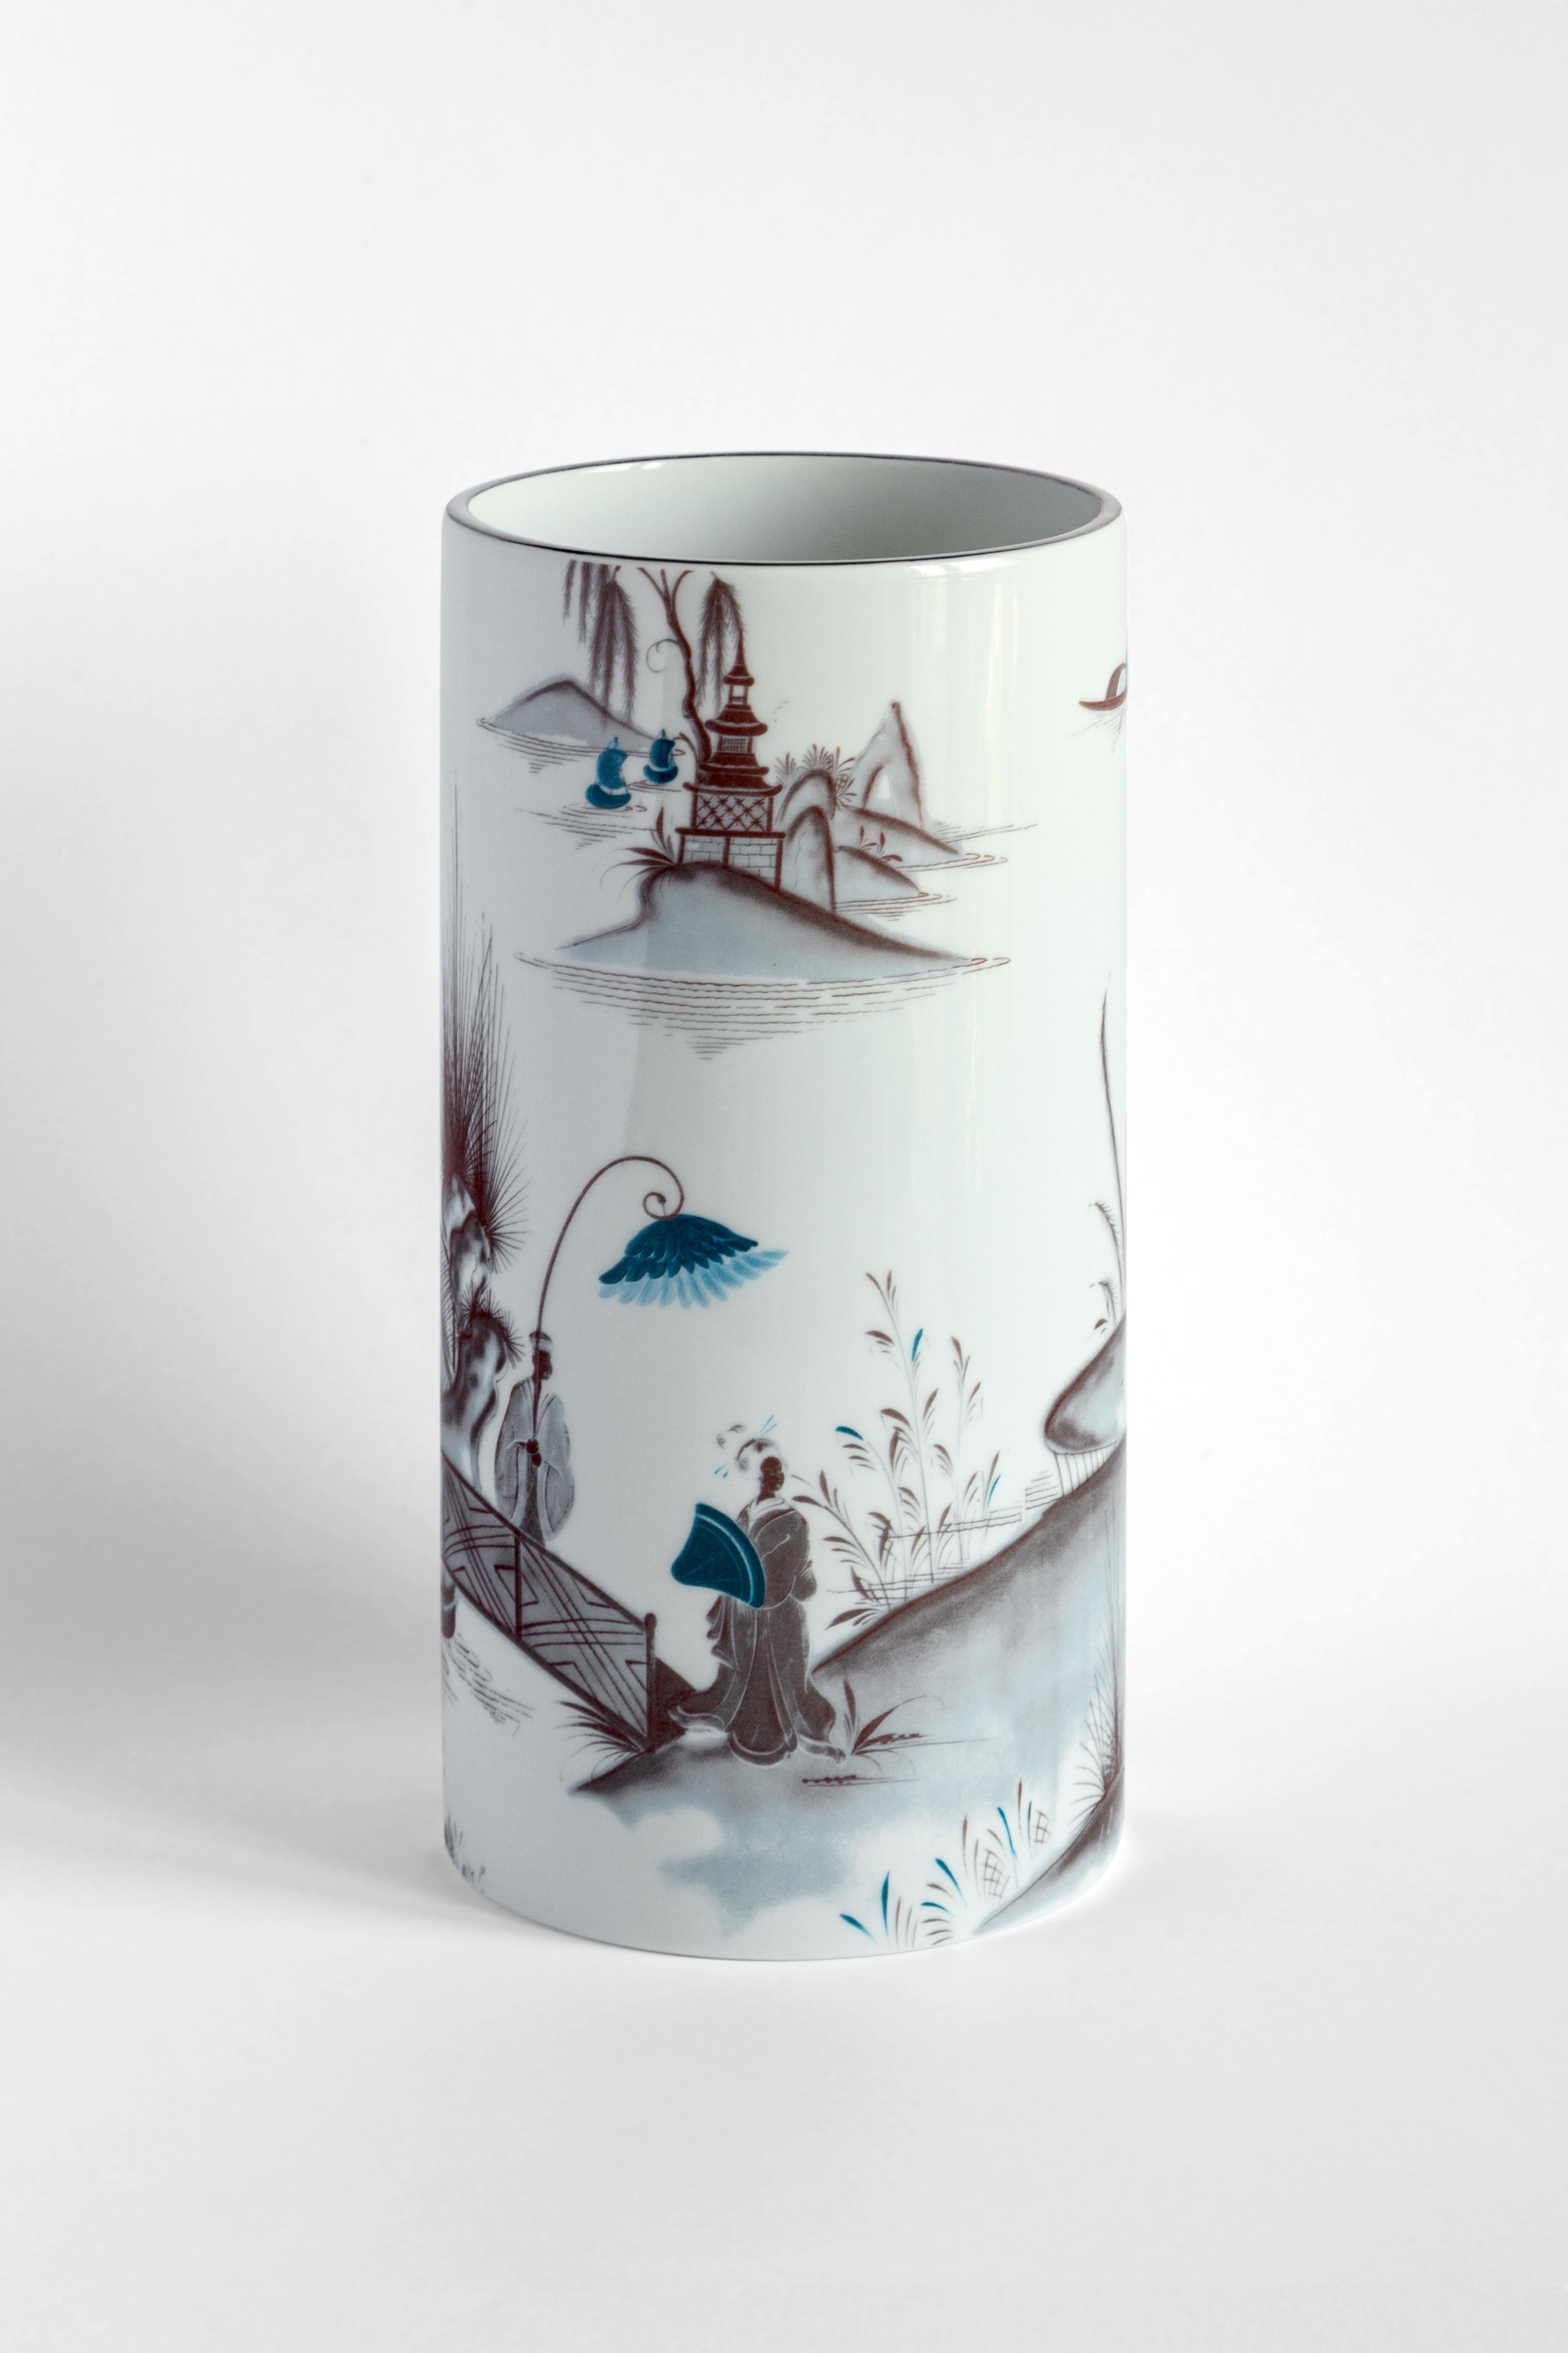 Part of the Grand Tour collection by Vito Nesta, the Natsumi series of porcelain plates is inspired by the artist's travels around the world. The classic Japanese landscape highlights two figures walking on a bridge on a pond surrounded by cherry